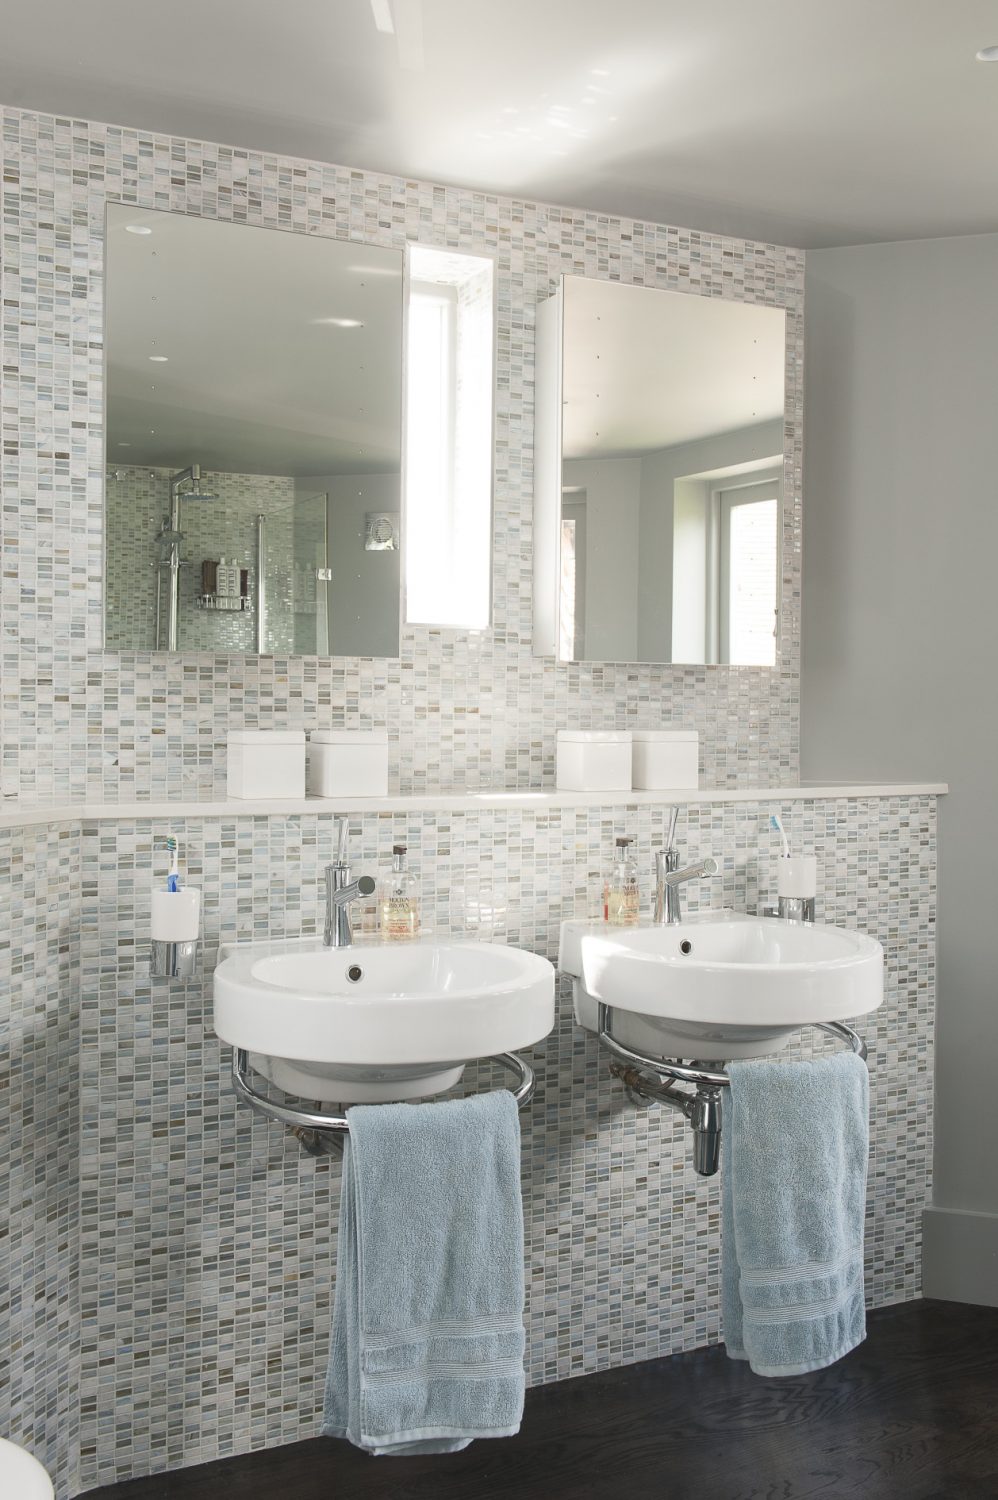 The natural light bounces off the iridescent rectangular tiles covering the wall behind the twin basins